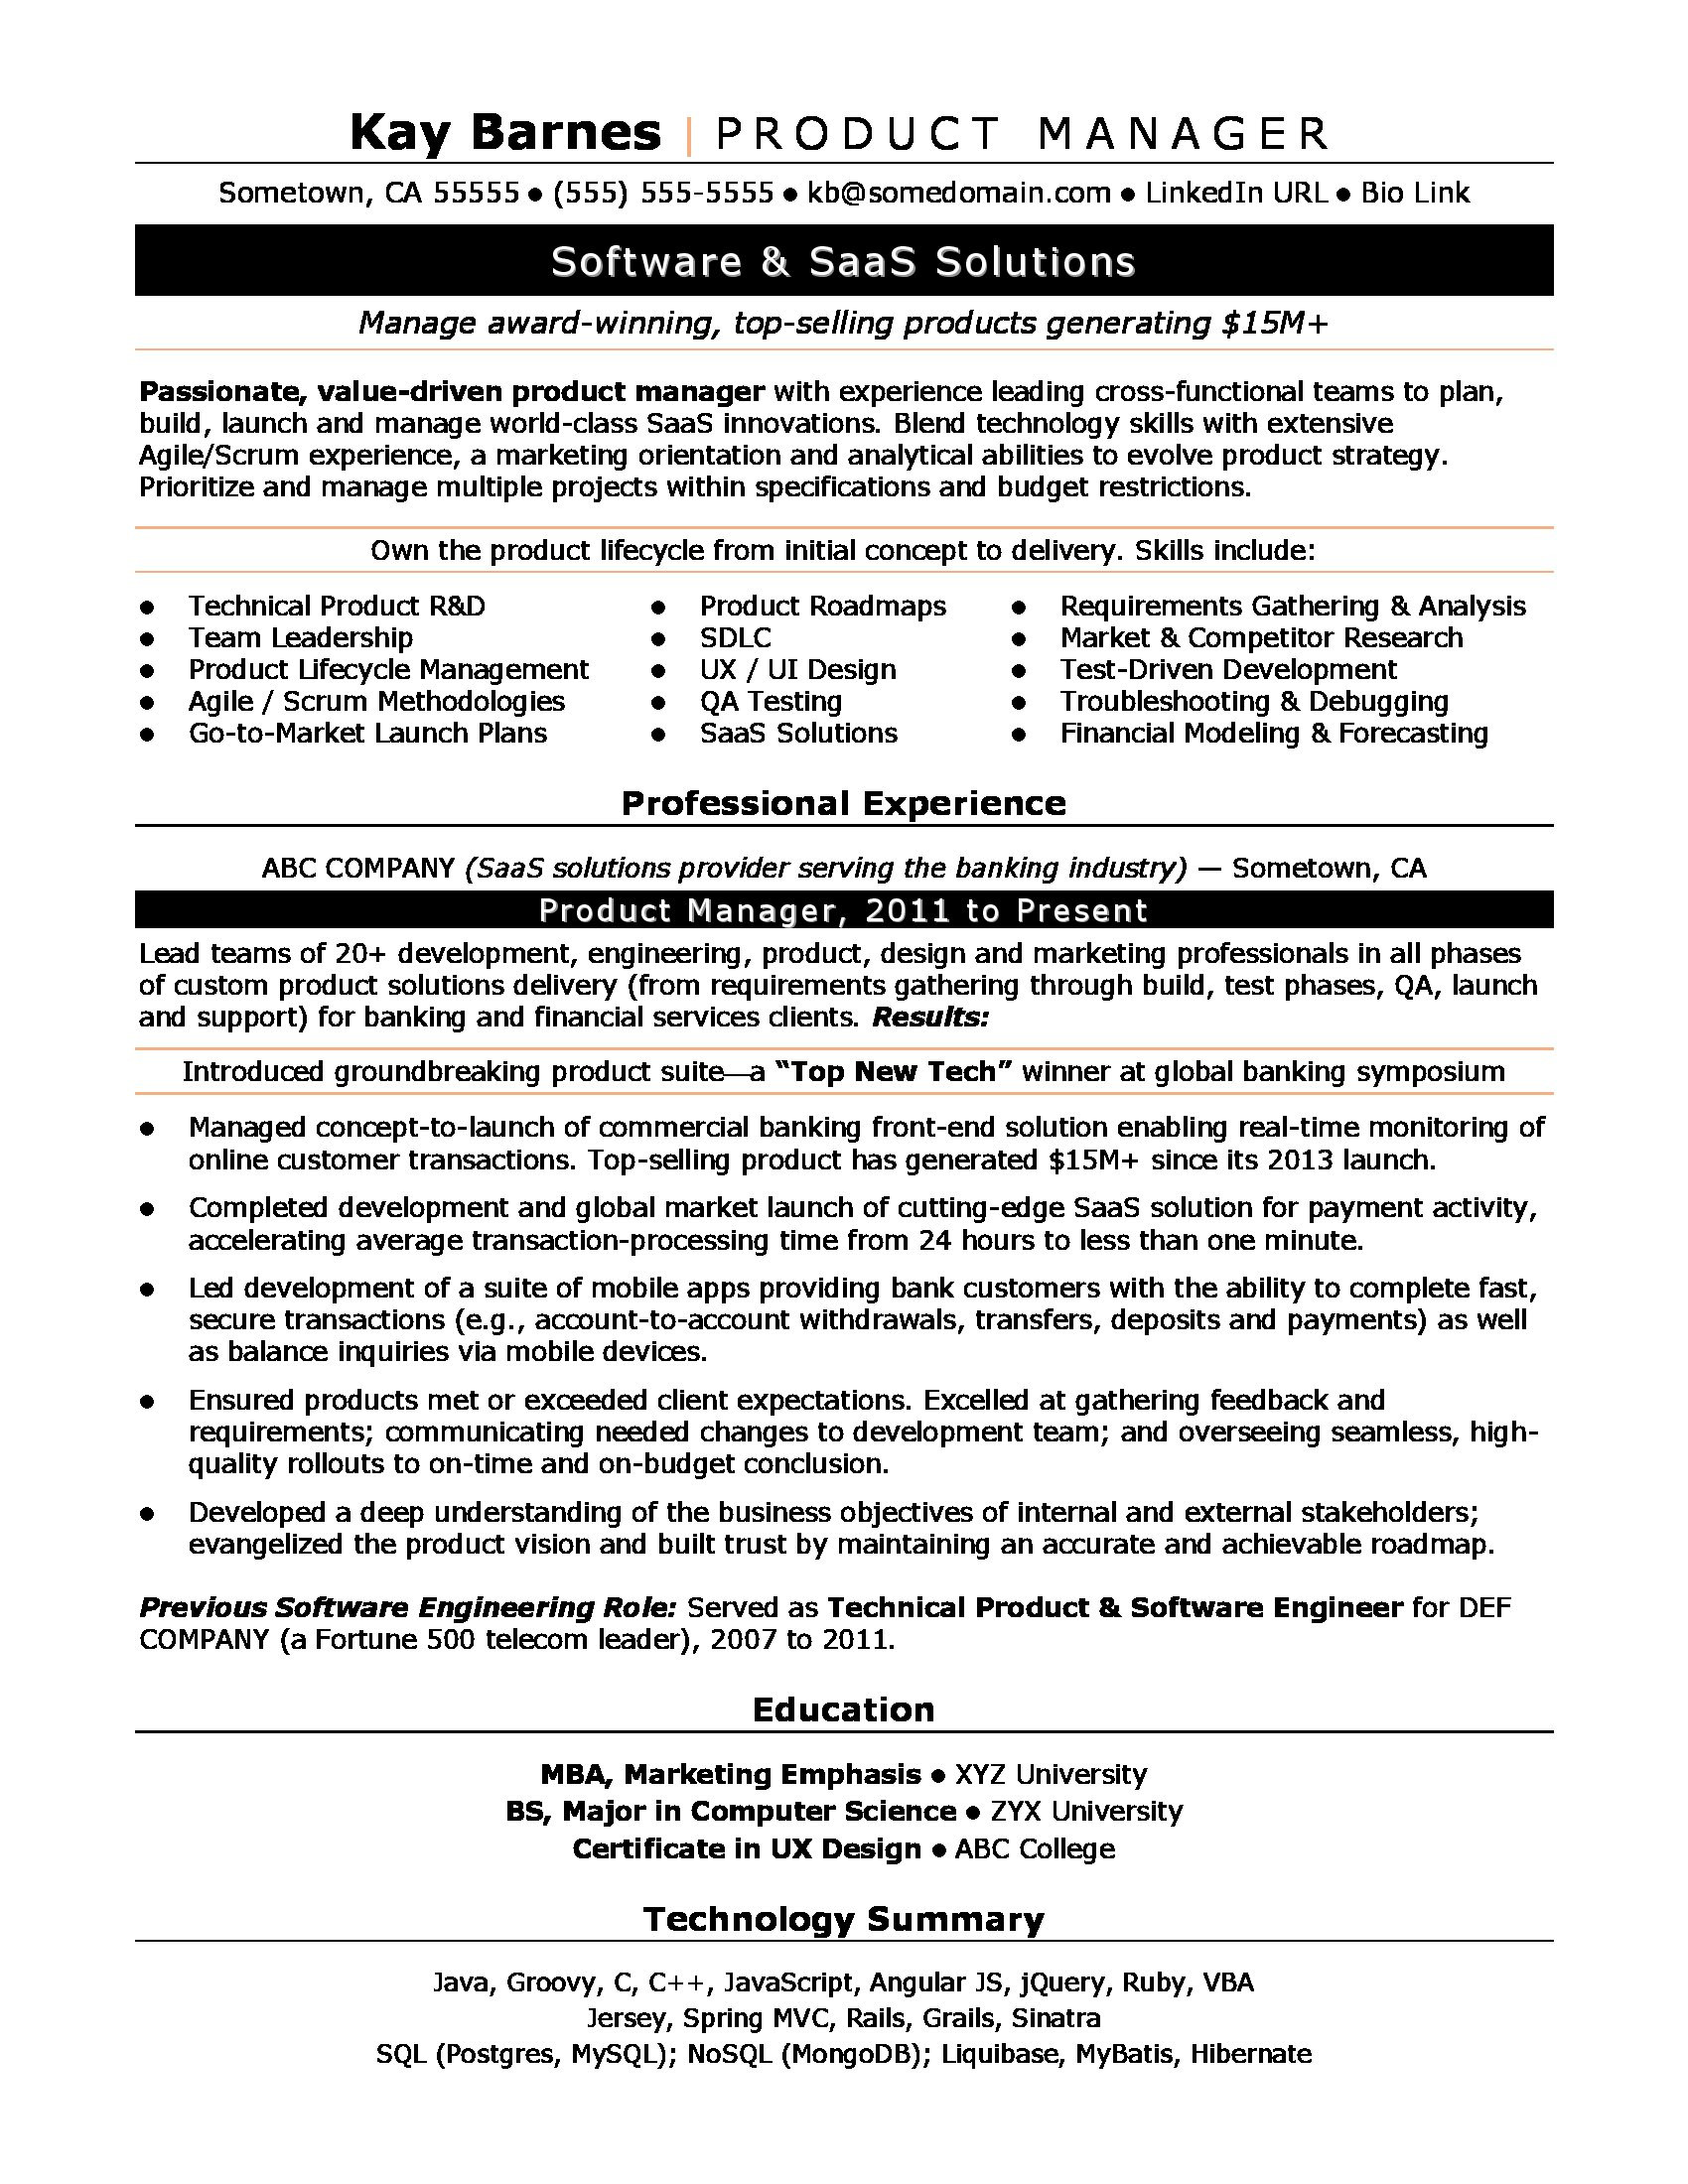 Software Product Development Manager Resume Sample Product Manager Resume Sample Monster.com